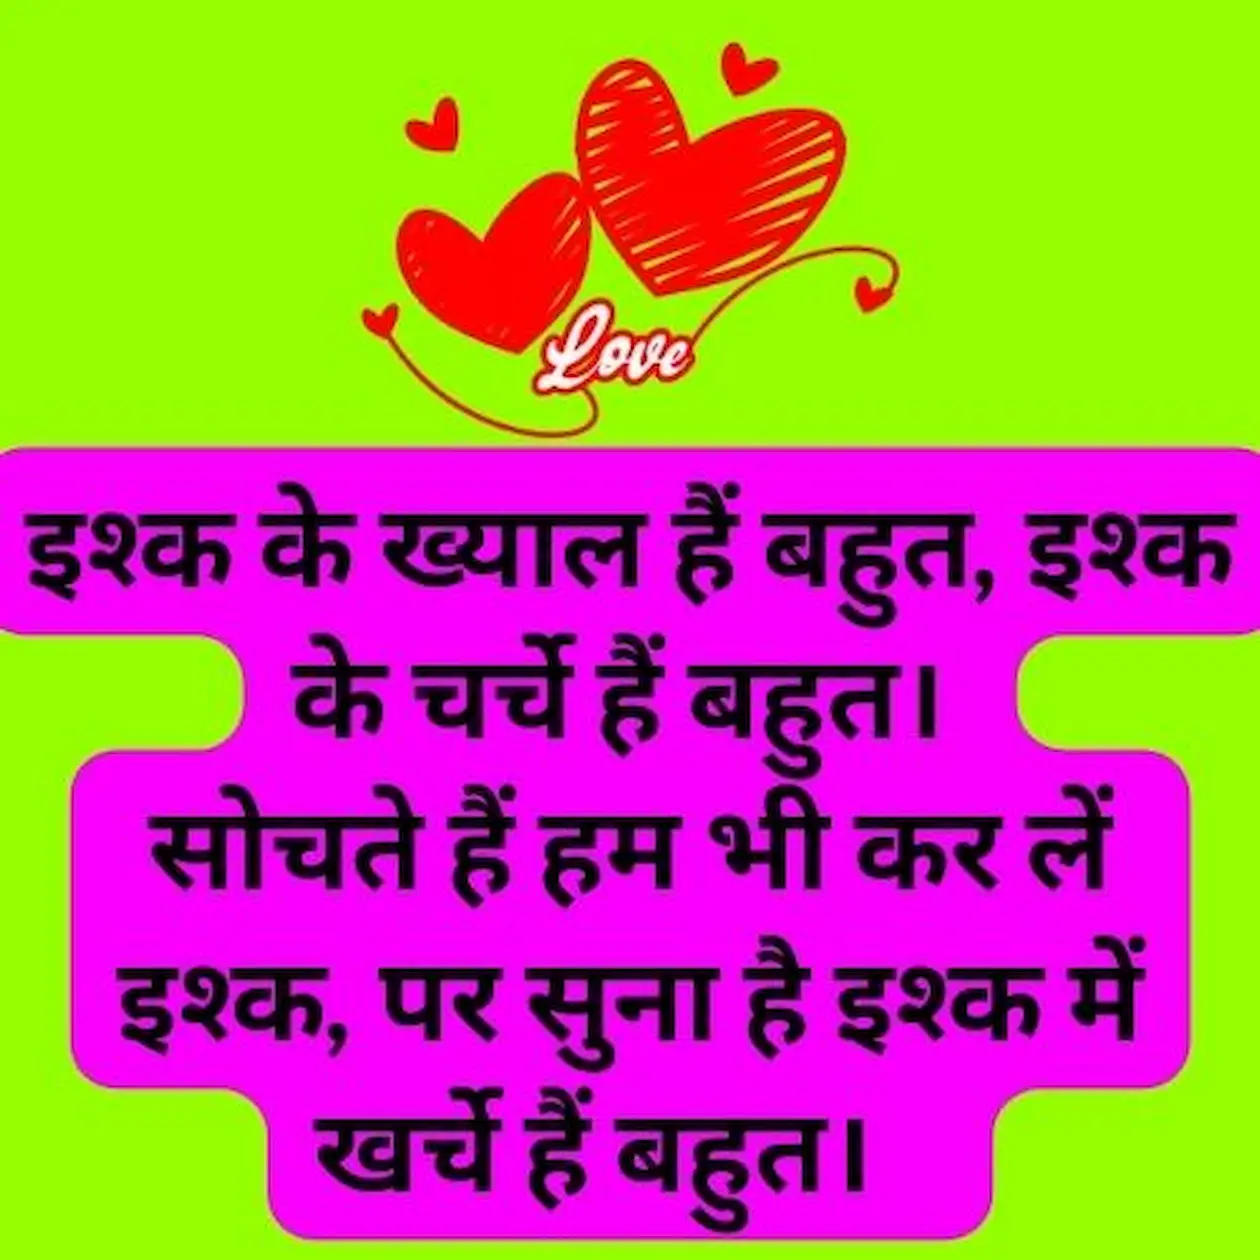 Two hearts animation, and funny text in Hindi about the expenses of love.